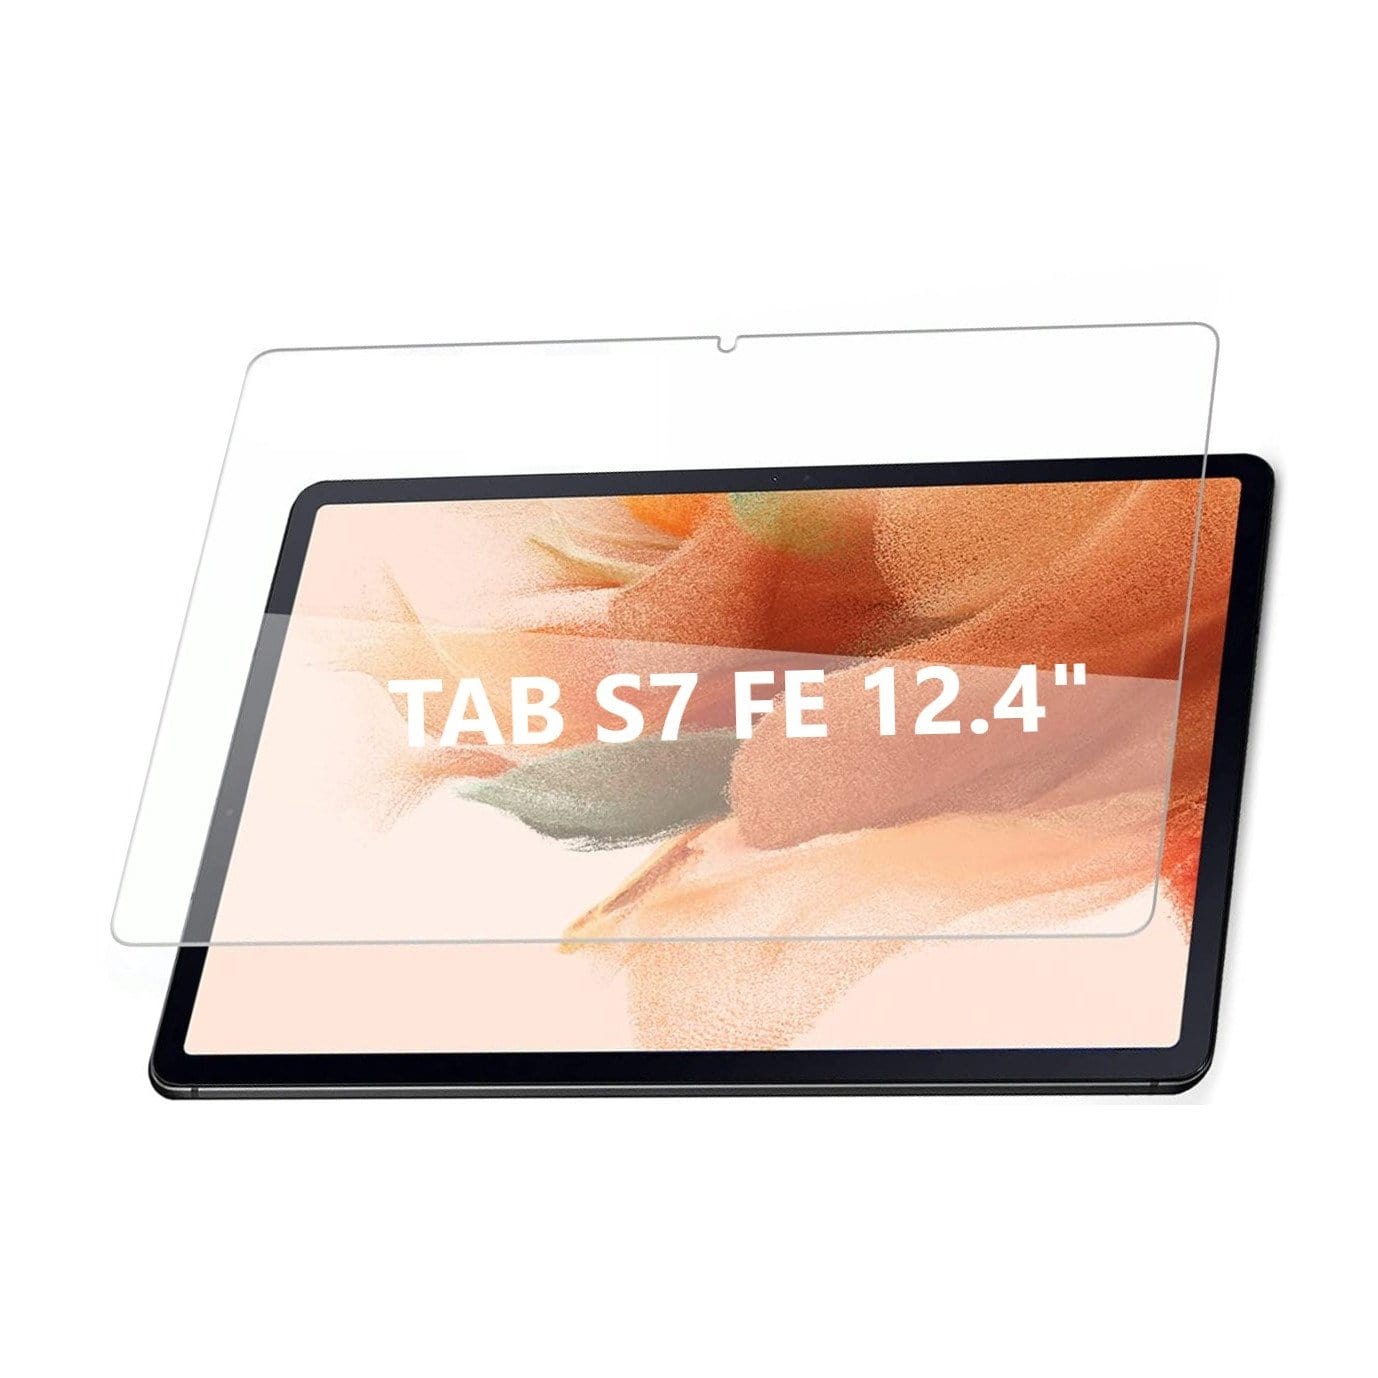 ZeroDamage Tempered Glass Screen Protector for Samsung Galaxy Tab S7